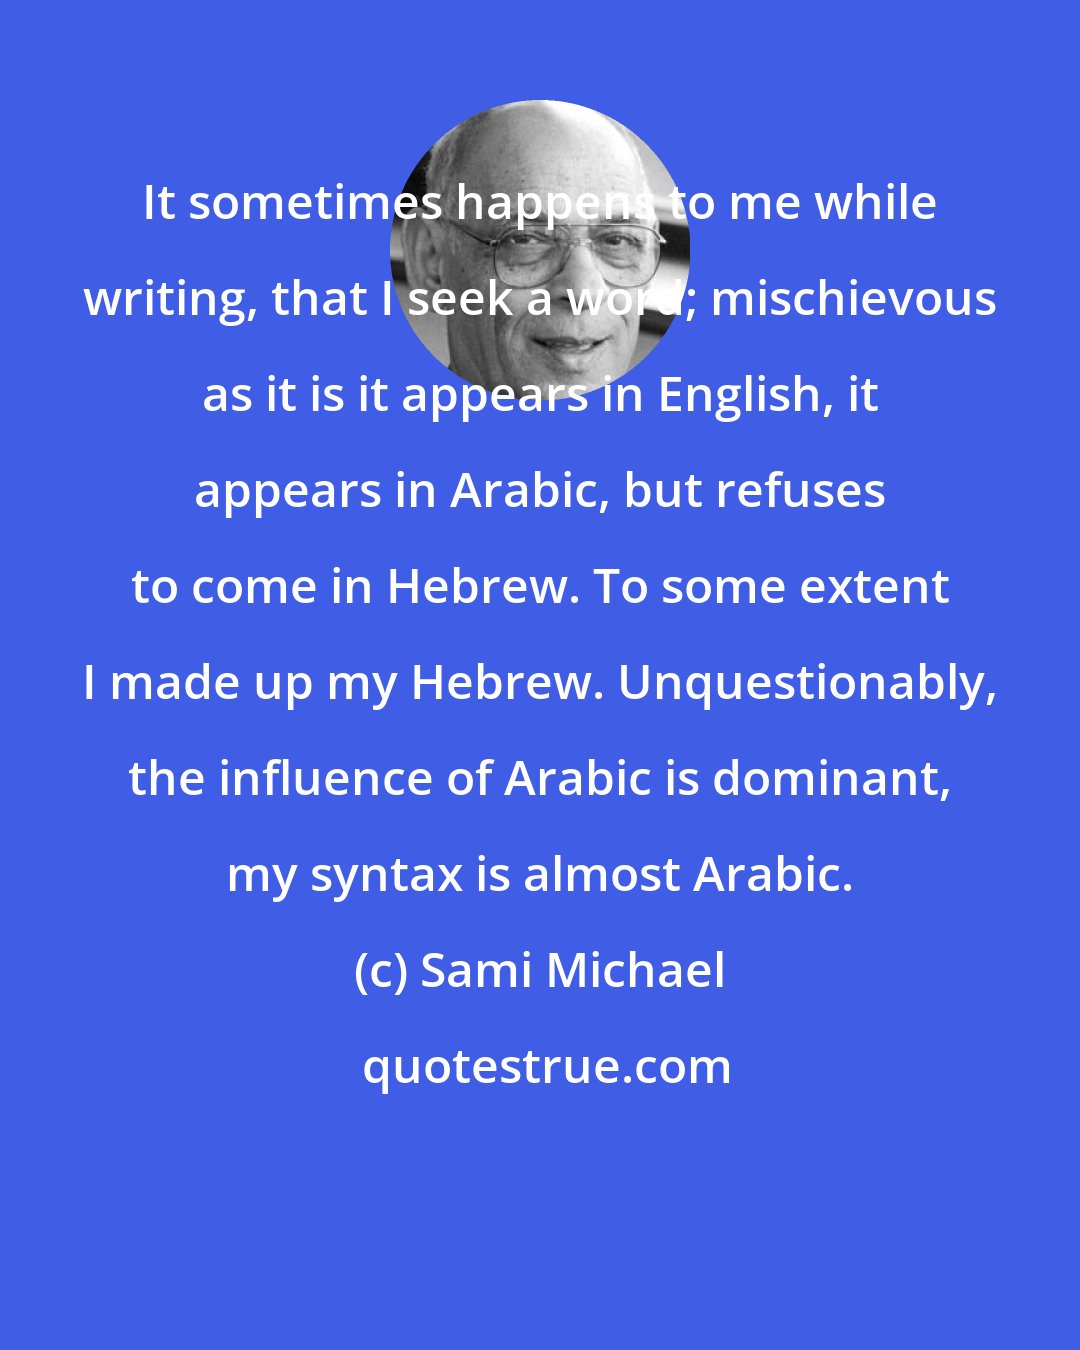 Sami Michael: It sometimes happens to me while writing, that I seek a word; mischievous as it is it appears in English, it appears in Arabic, but refuses to come in Hebrew. To some extent I made up my Hebrew. Unquestionably, the influence of Arabic is dominant, my syntax is almost Arabic.